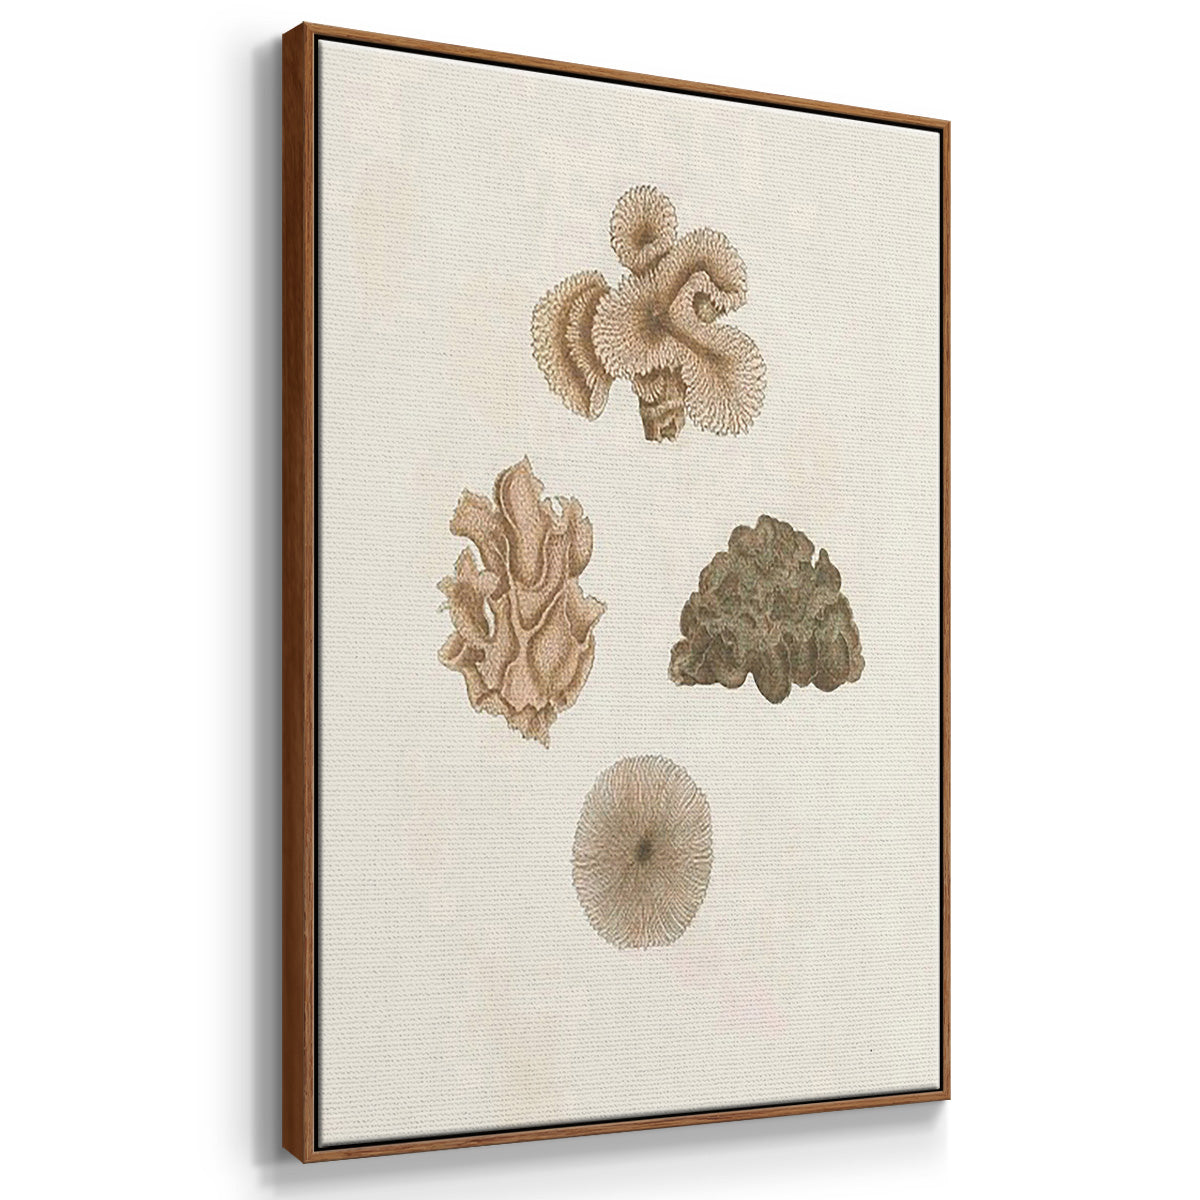 Knorr Shells & Coral VI - Framed Premium Gallery Wrapped Canvas L Frame 3 Piece Set - Ready to Hang